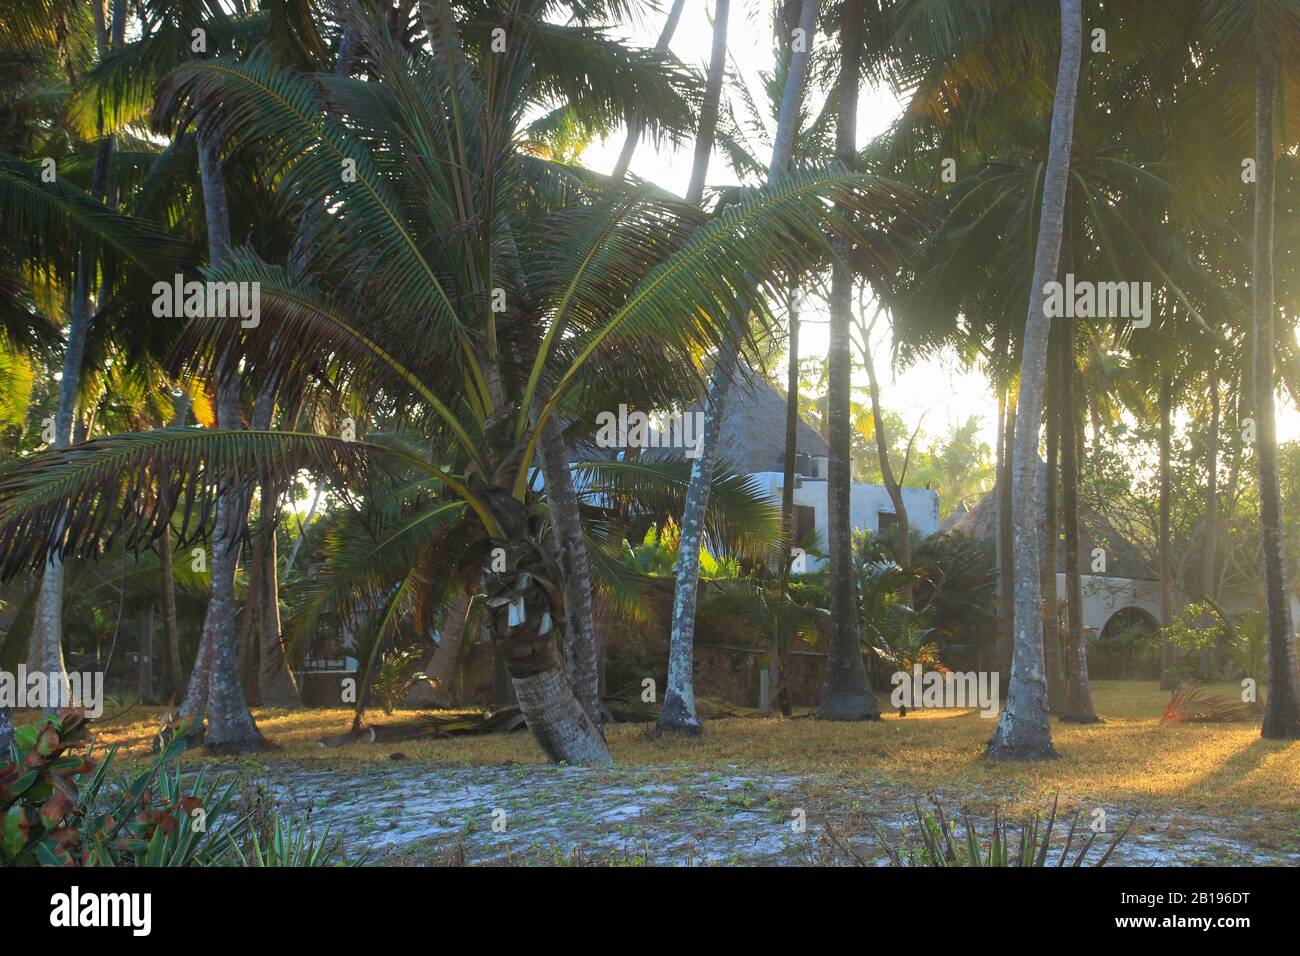 Mombasa, Kenya - March 2, 2015: Resort on the shores of the Indian Ocean, Diani Beach, Mombasa, Africa Stock Photo